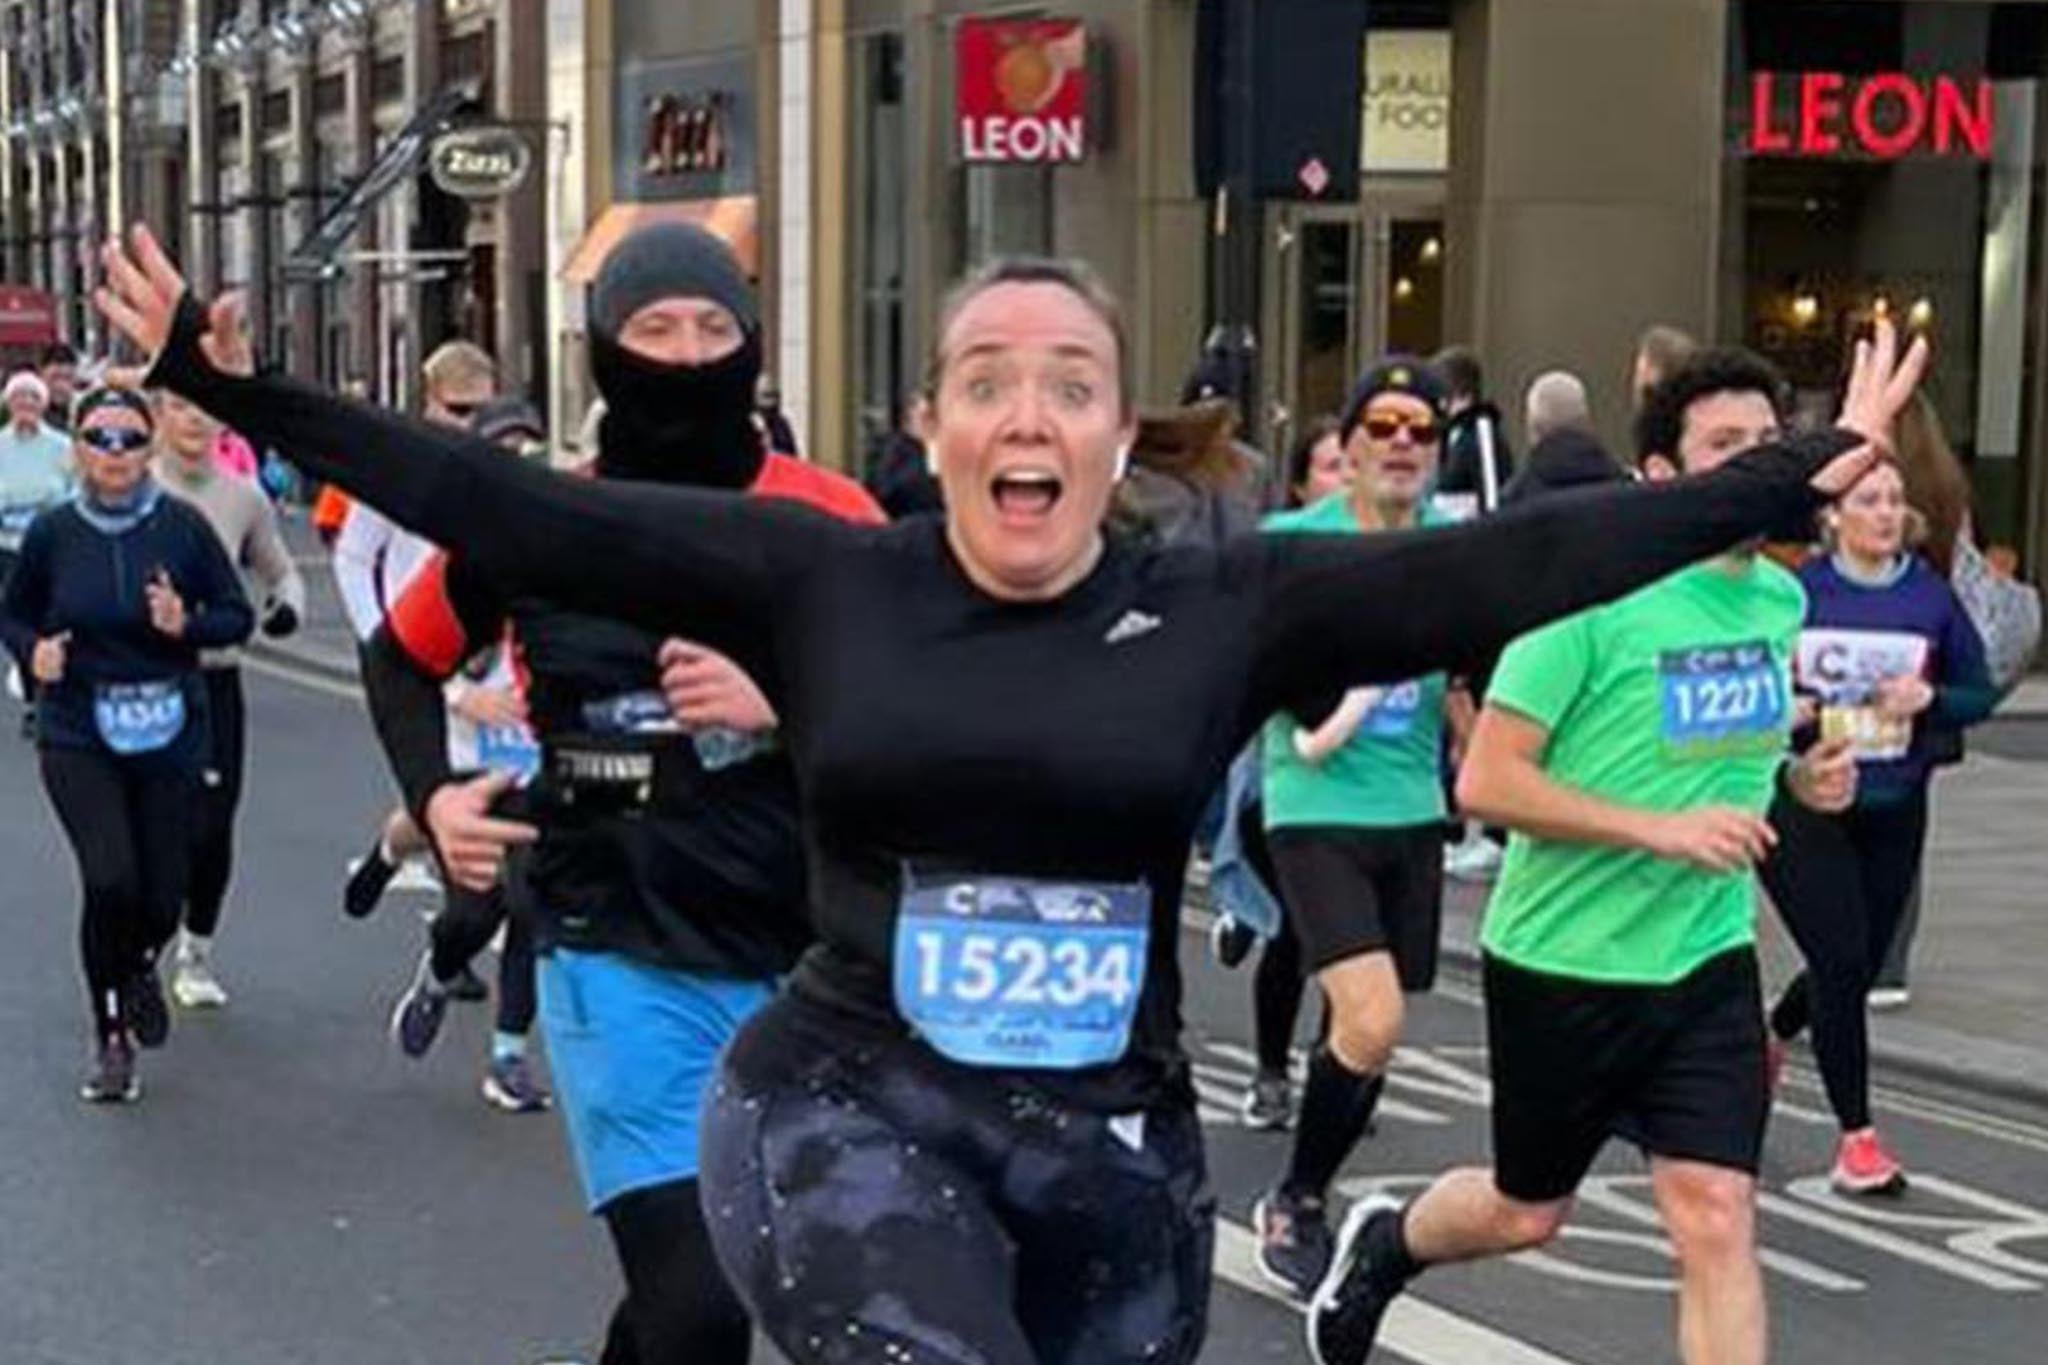 Doing 5k runs has been life-changing for Isabel